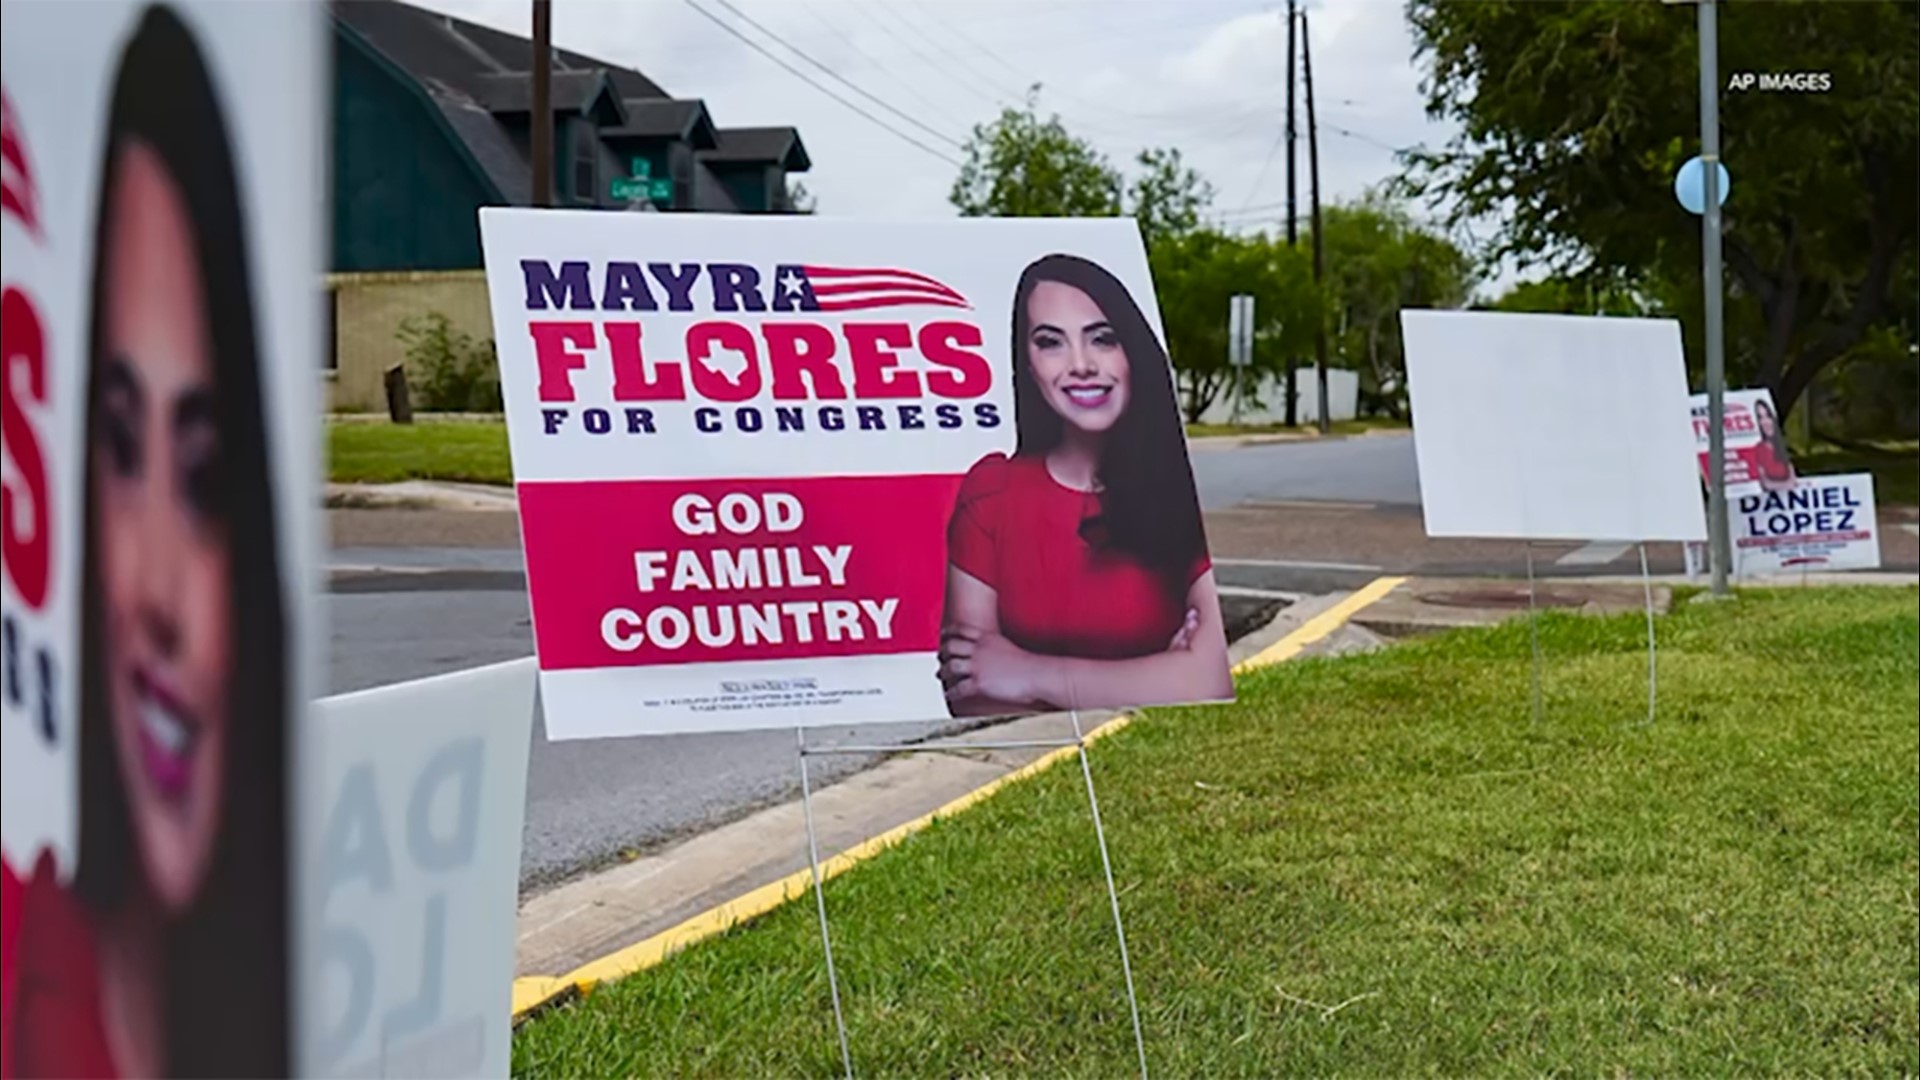 Mayra Flores' victory in Texas U.S. House District 34 is the first time a Republican won there in 150 years and sends a warning sign to Democrats ahead of midterms.